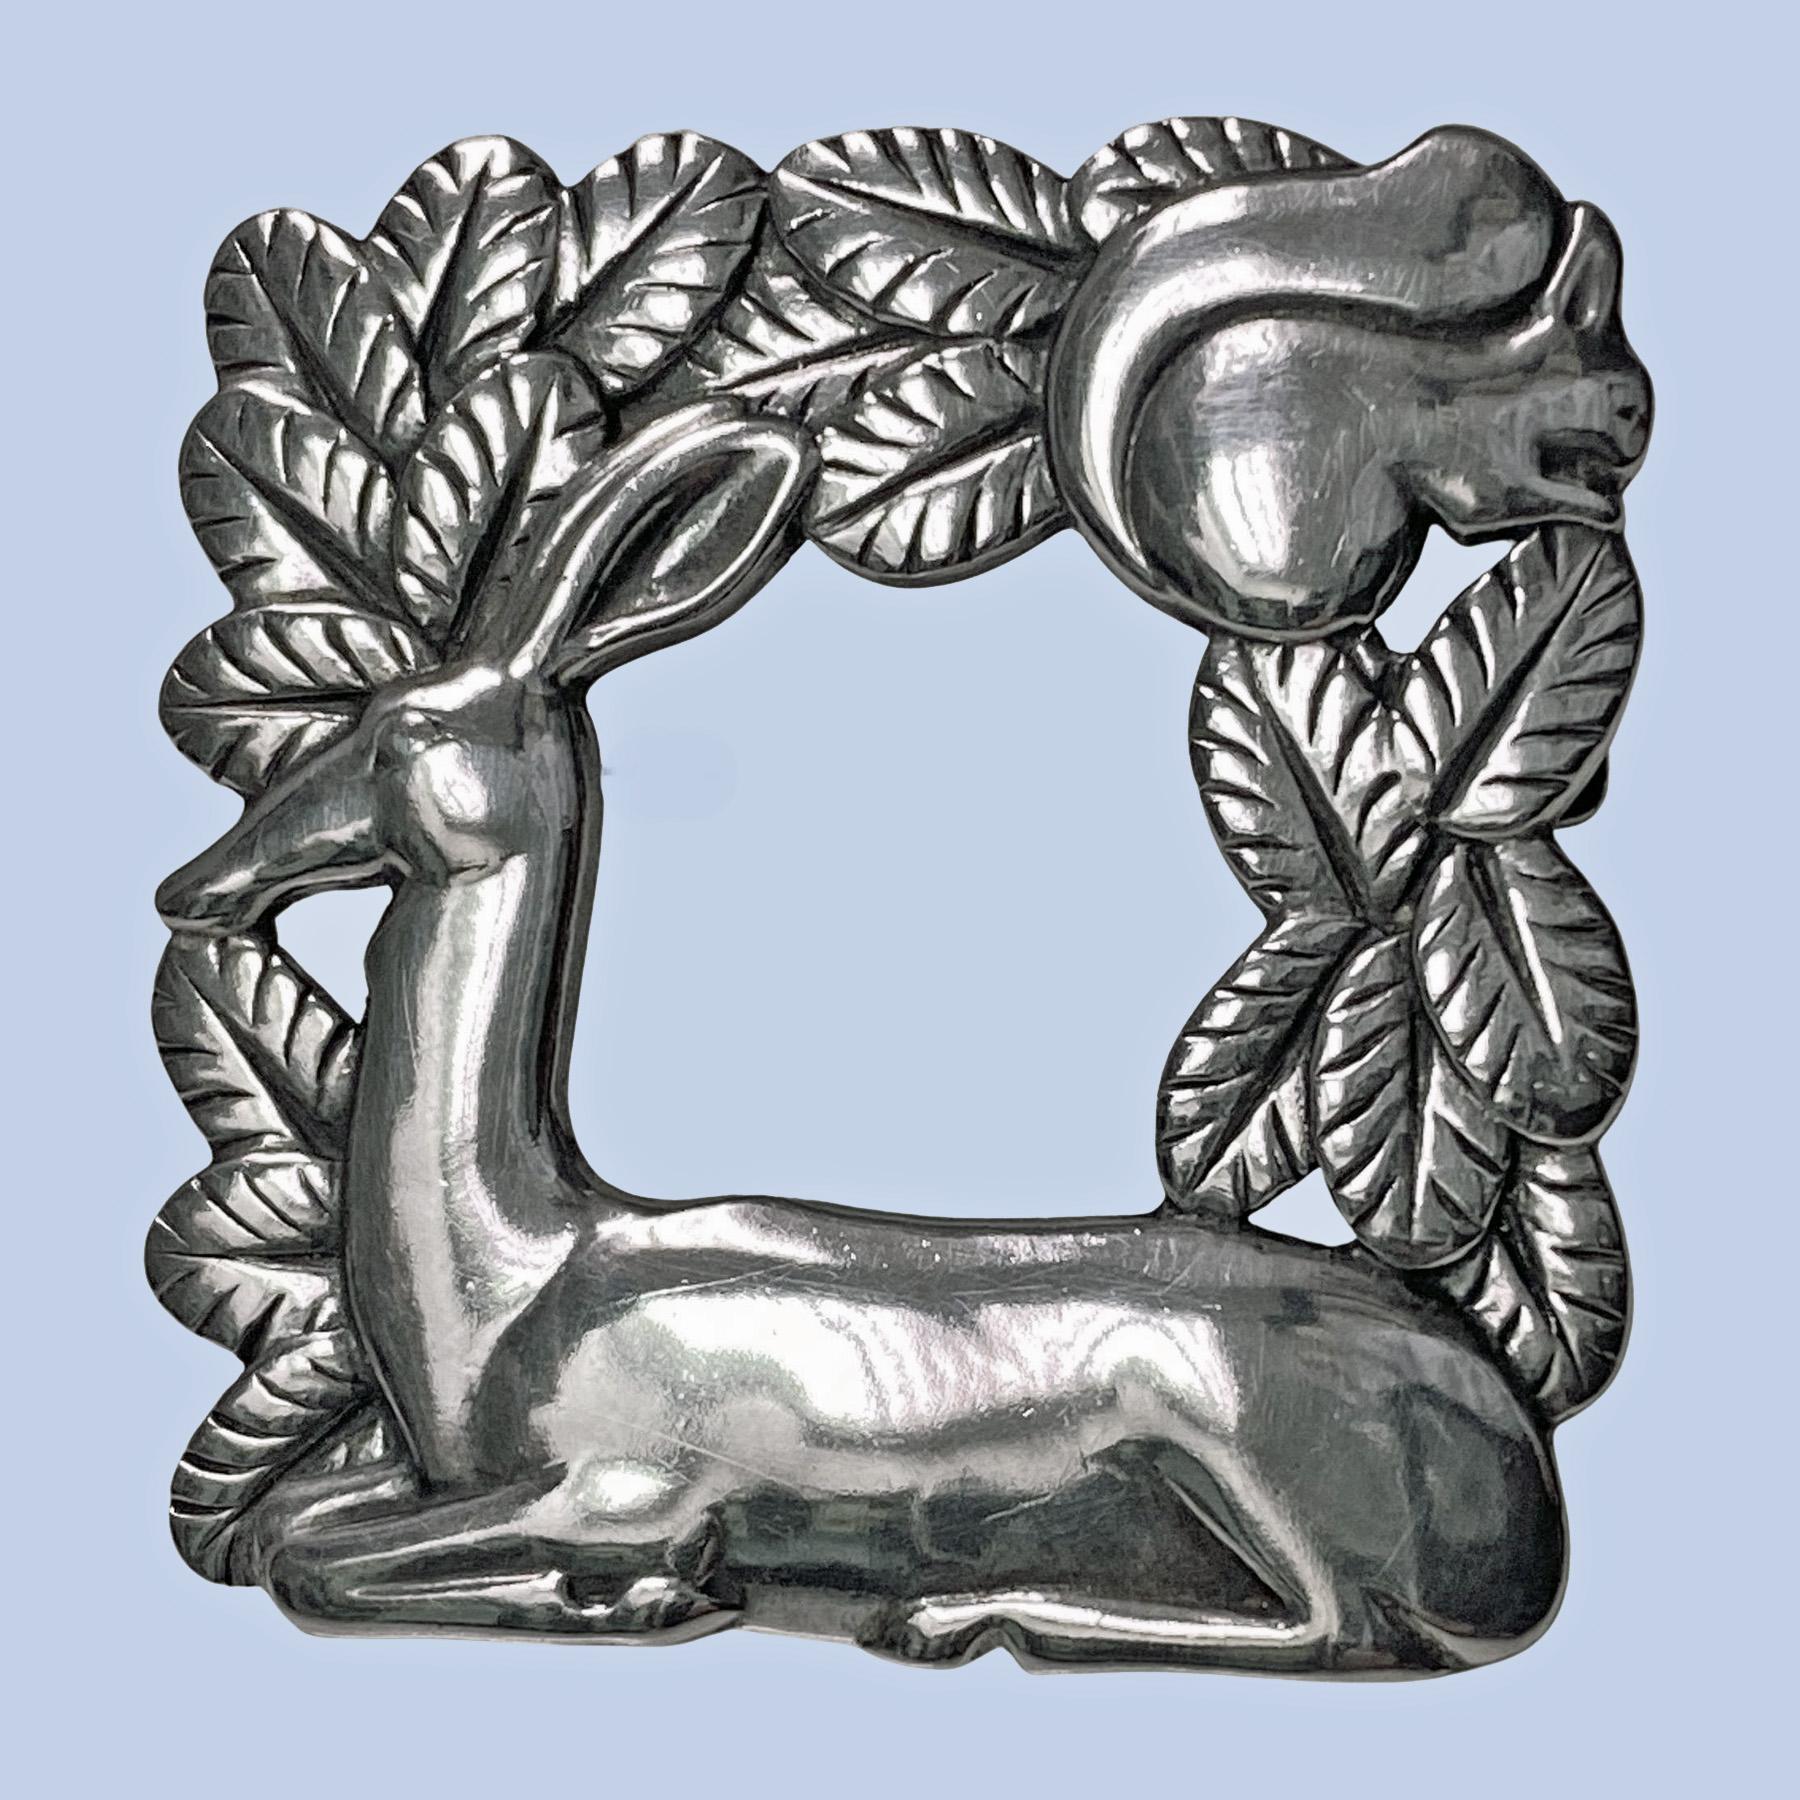 Georg Jensen Sterling Silver Deer and Squirrel Brooch #318 Vintage Sterling Silver, designed by Arno Malinowski. Intricately detailed, open-squared brooch featuring a deer resting with squirrel in foliage. Measures: 1.5 x 1.5 inches. Item Weight: